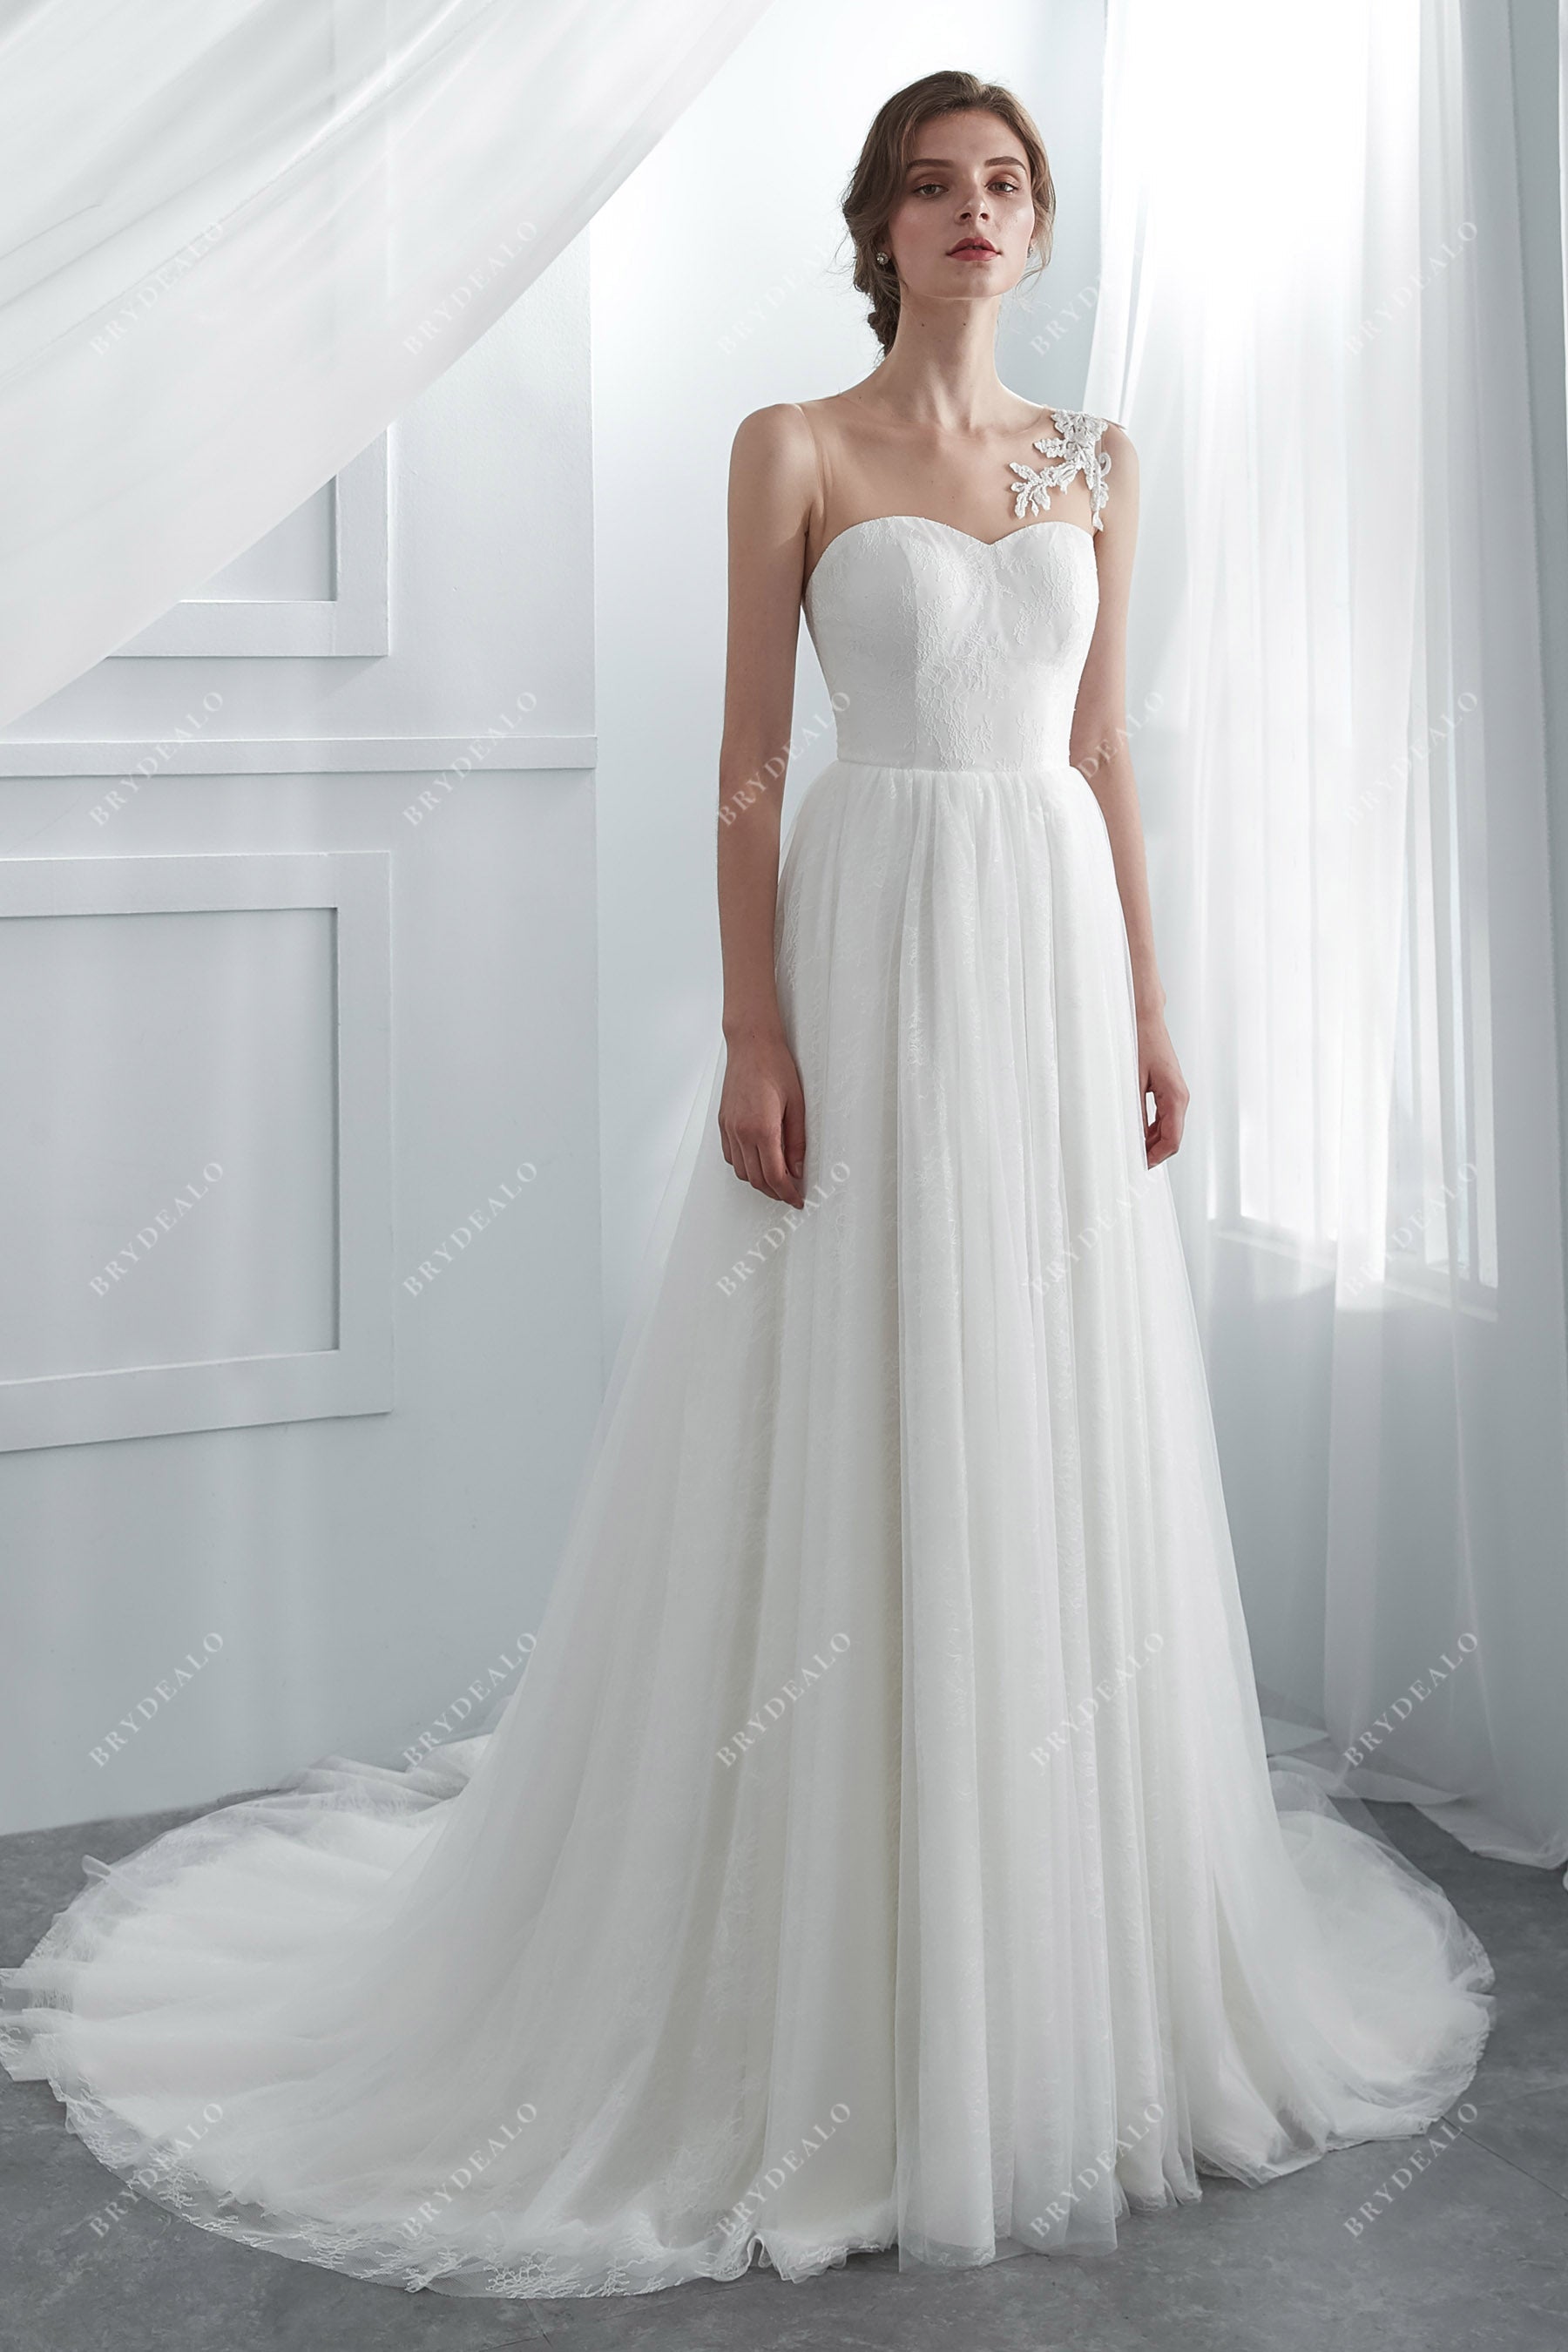 Sample Sale | Designer Beaded Lace Illusion A-line Bridal Gown